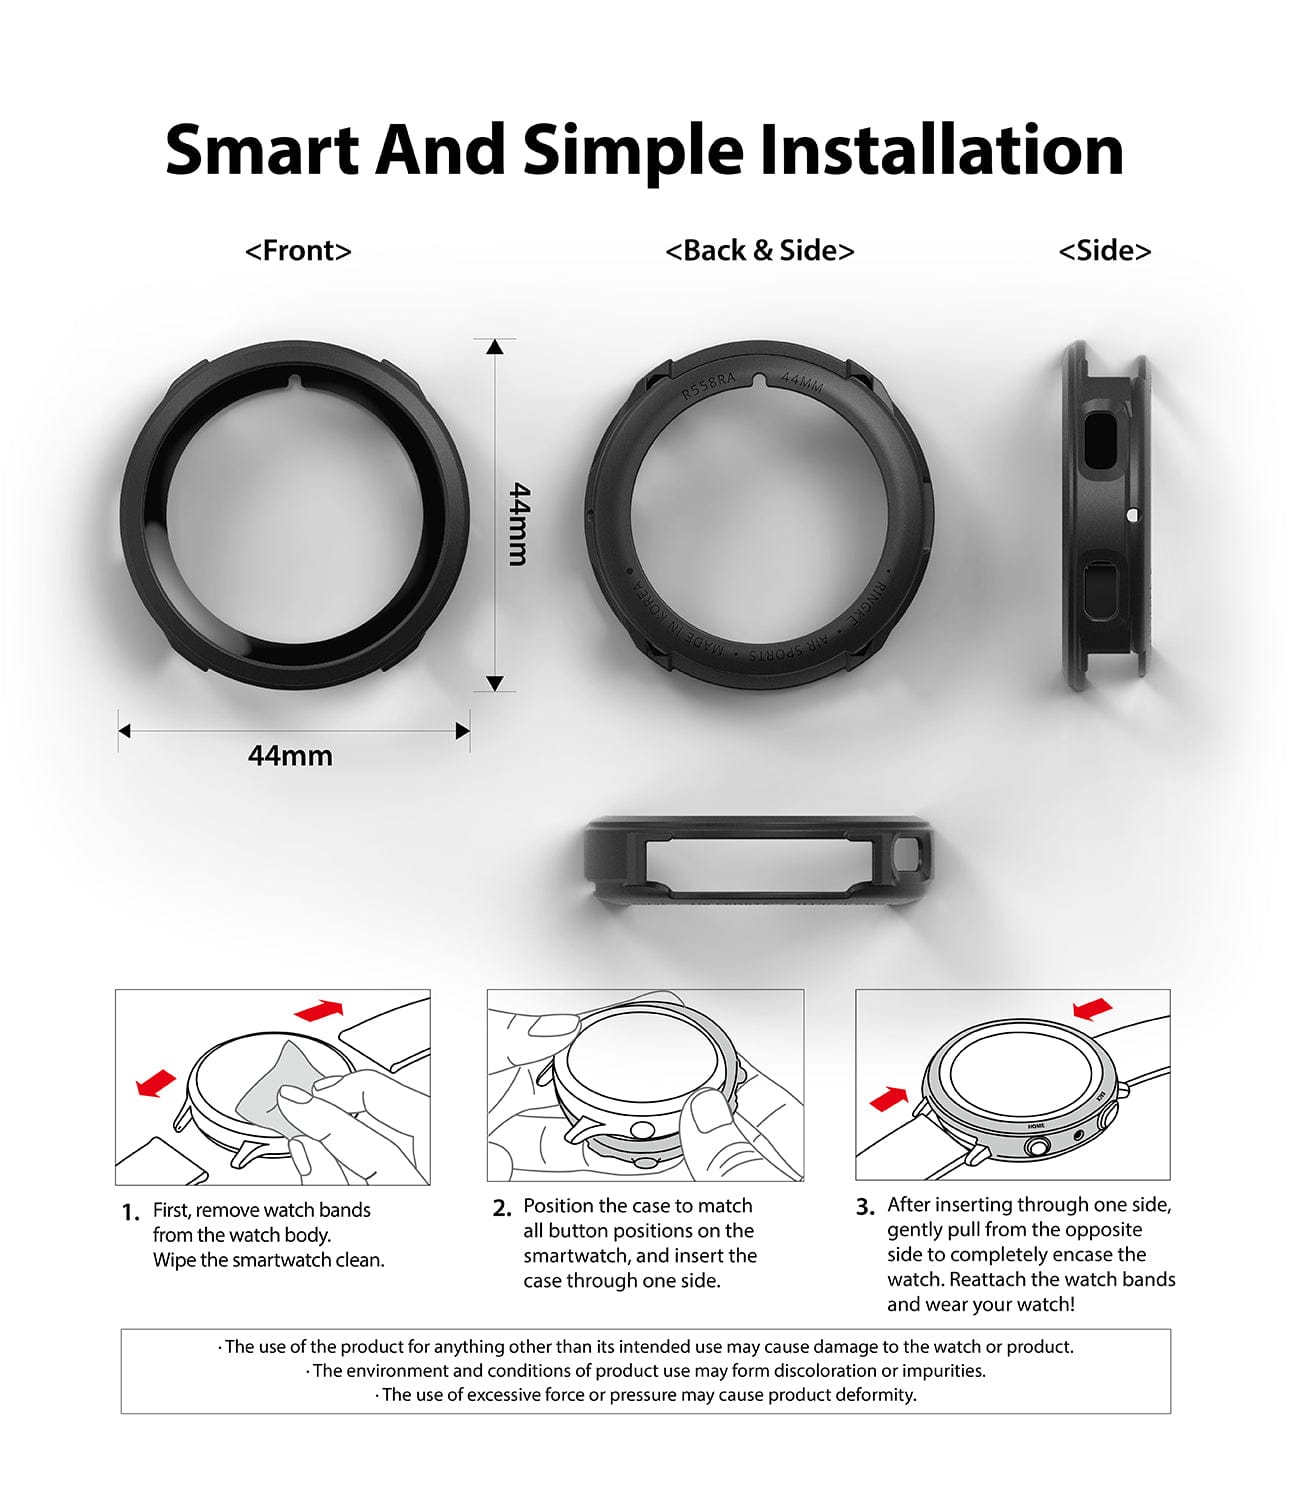 Experience a smart and simple installation process, making it easy to apply the case to your device hassle-free.